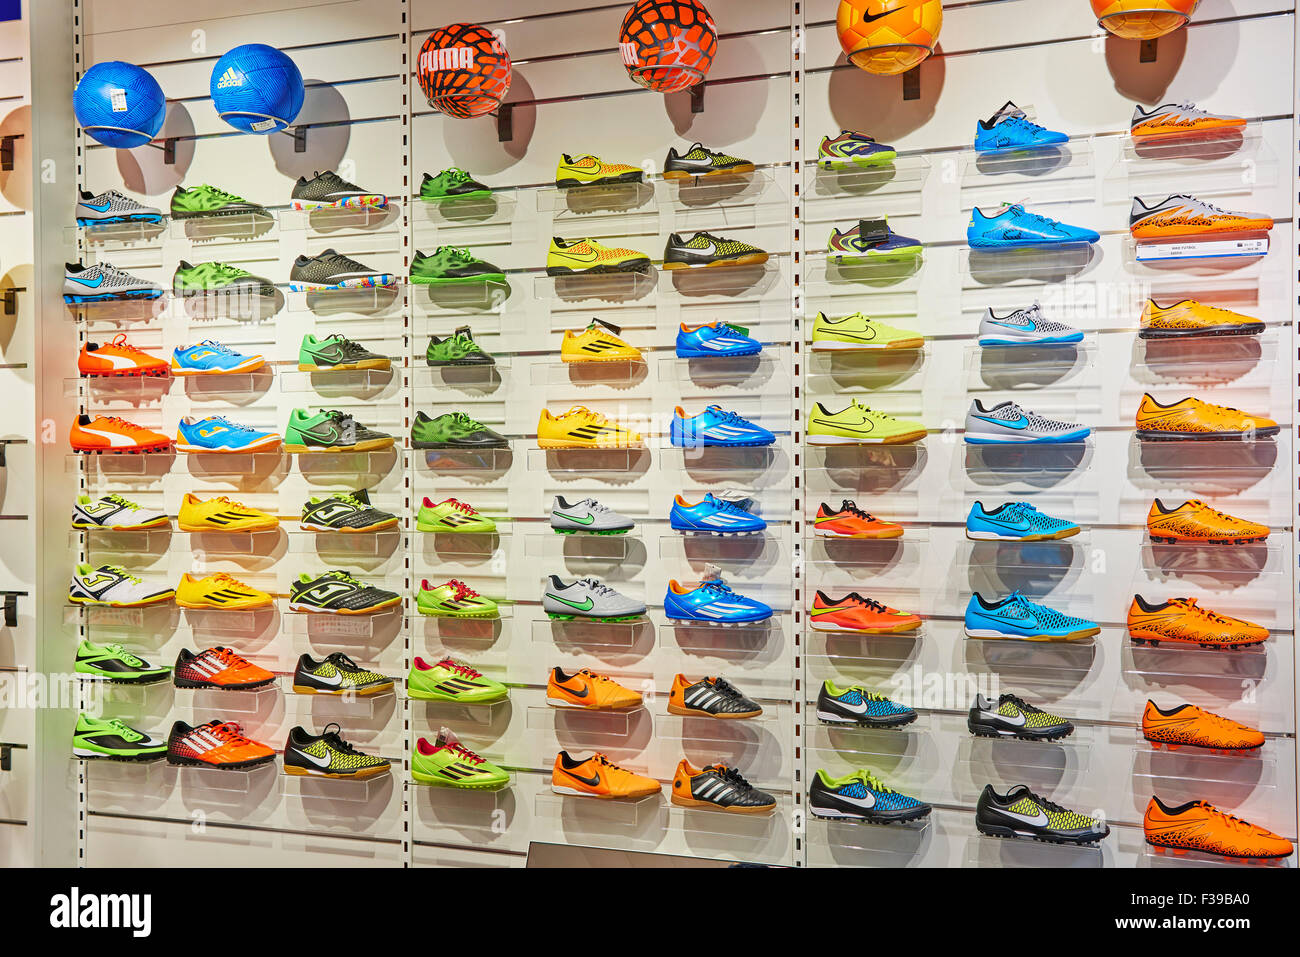 2,117 Shoe Wall Display Images, Stock Photos, 3D objects, & Vectors |  Shutterstock